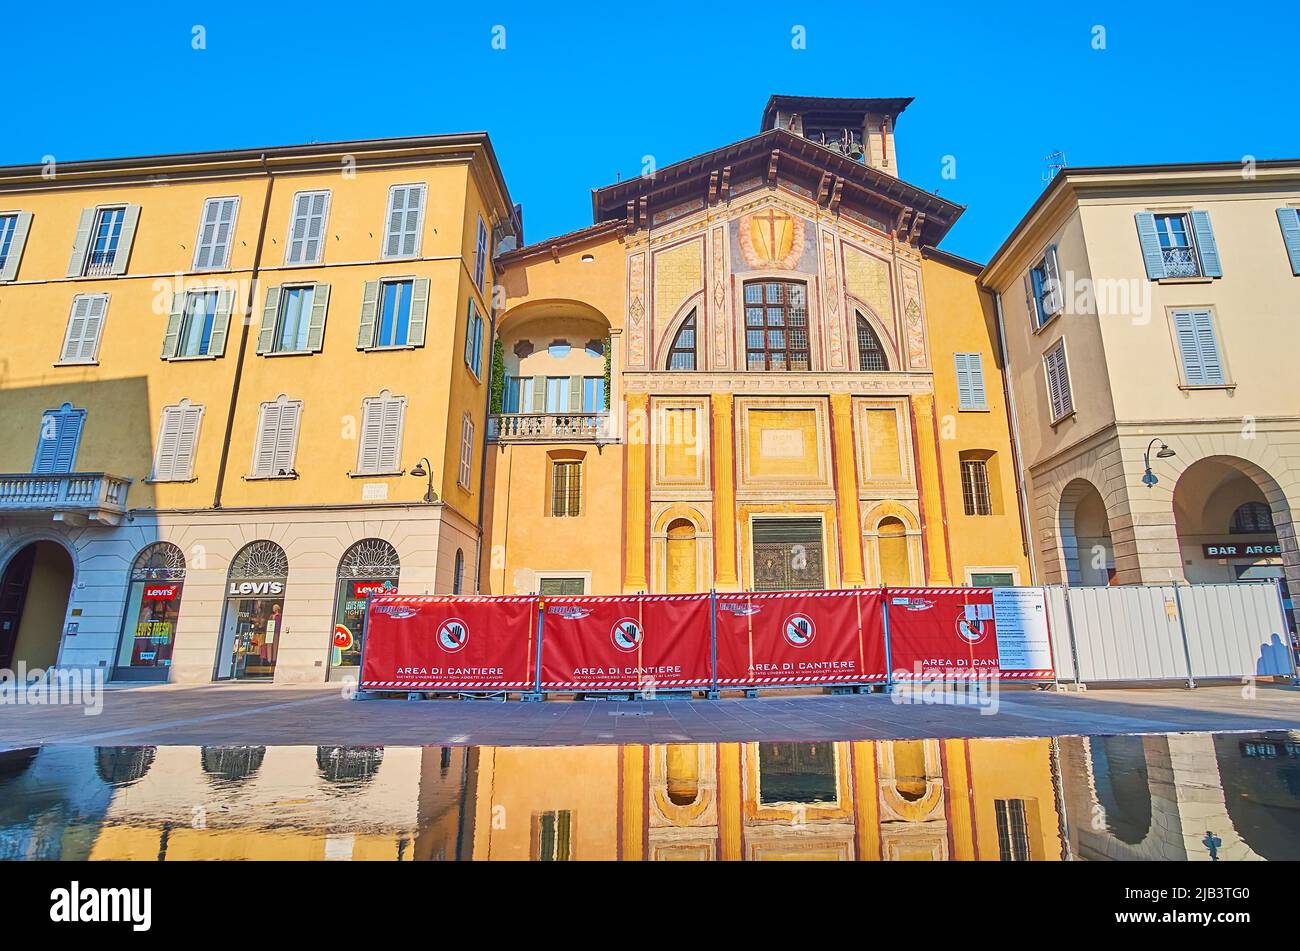 The ornate frescoed medieval San Giacomo Church, located on Piazza Guido Grimoldi with a giant puddle, reflecting the yellow church facade, Como, Lomb Stock Photo